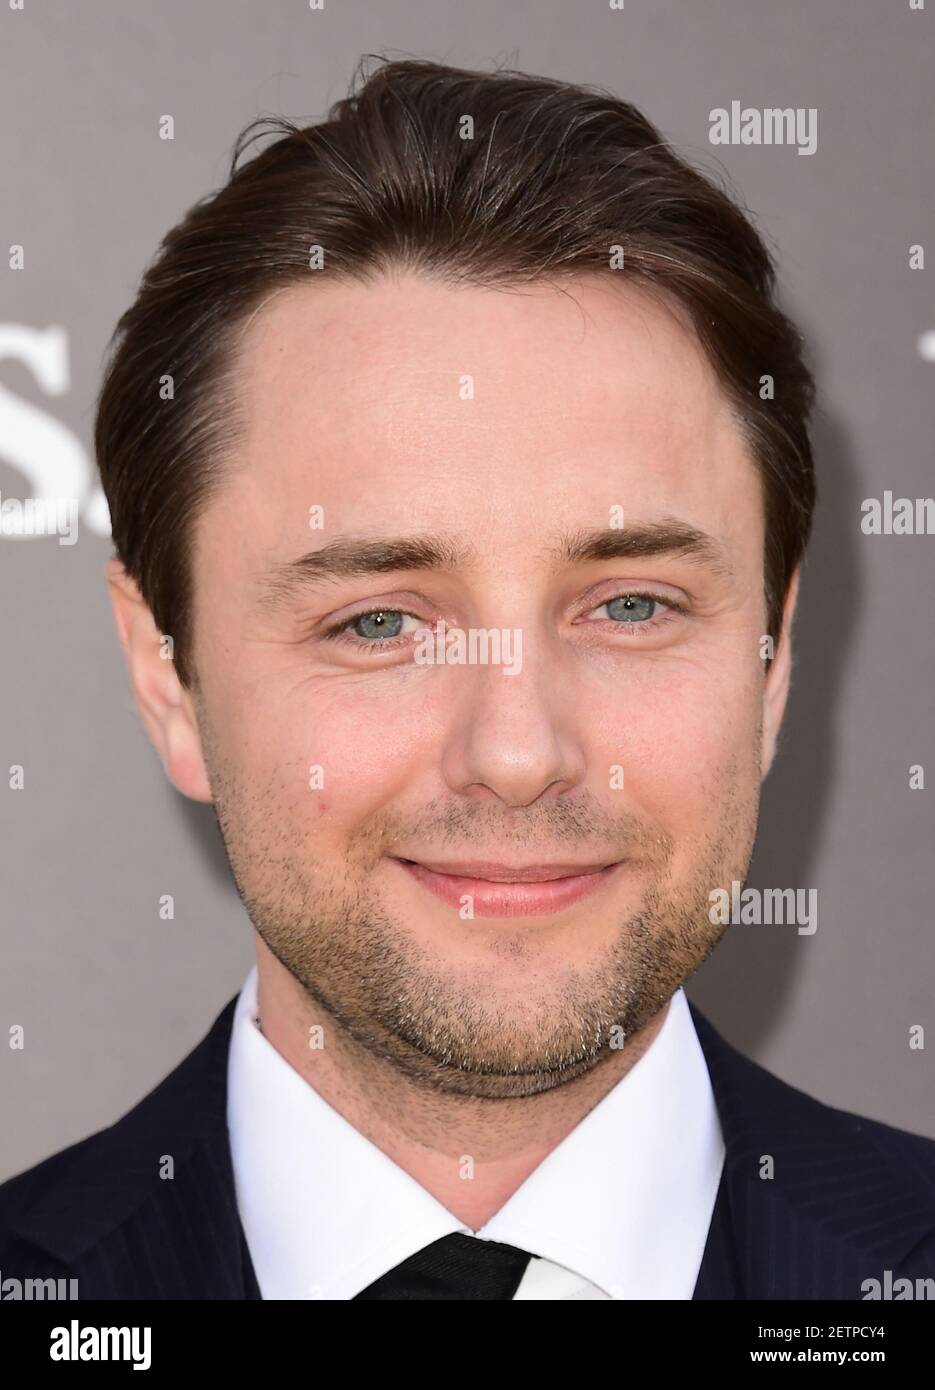 LOS ANGELES - APRIL 24: Vincent Kartheiser attends the LA Premiere of National Geographic's "Genius" at the Fox Theater on April 24, 2017 in Los Angeles, California. (Photo by Scott Kirkland/National Geographic/PictureGroup) *** Please Use Credit from Credit Field *** Stock Photo